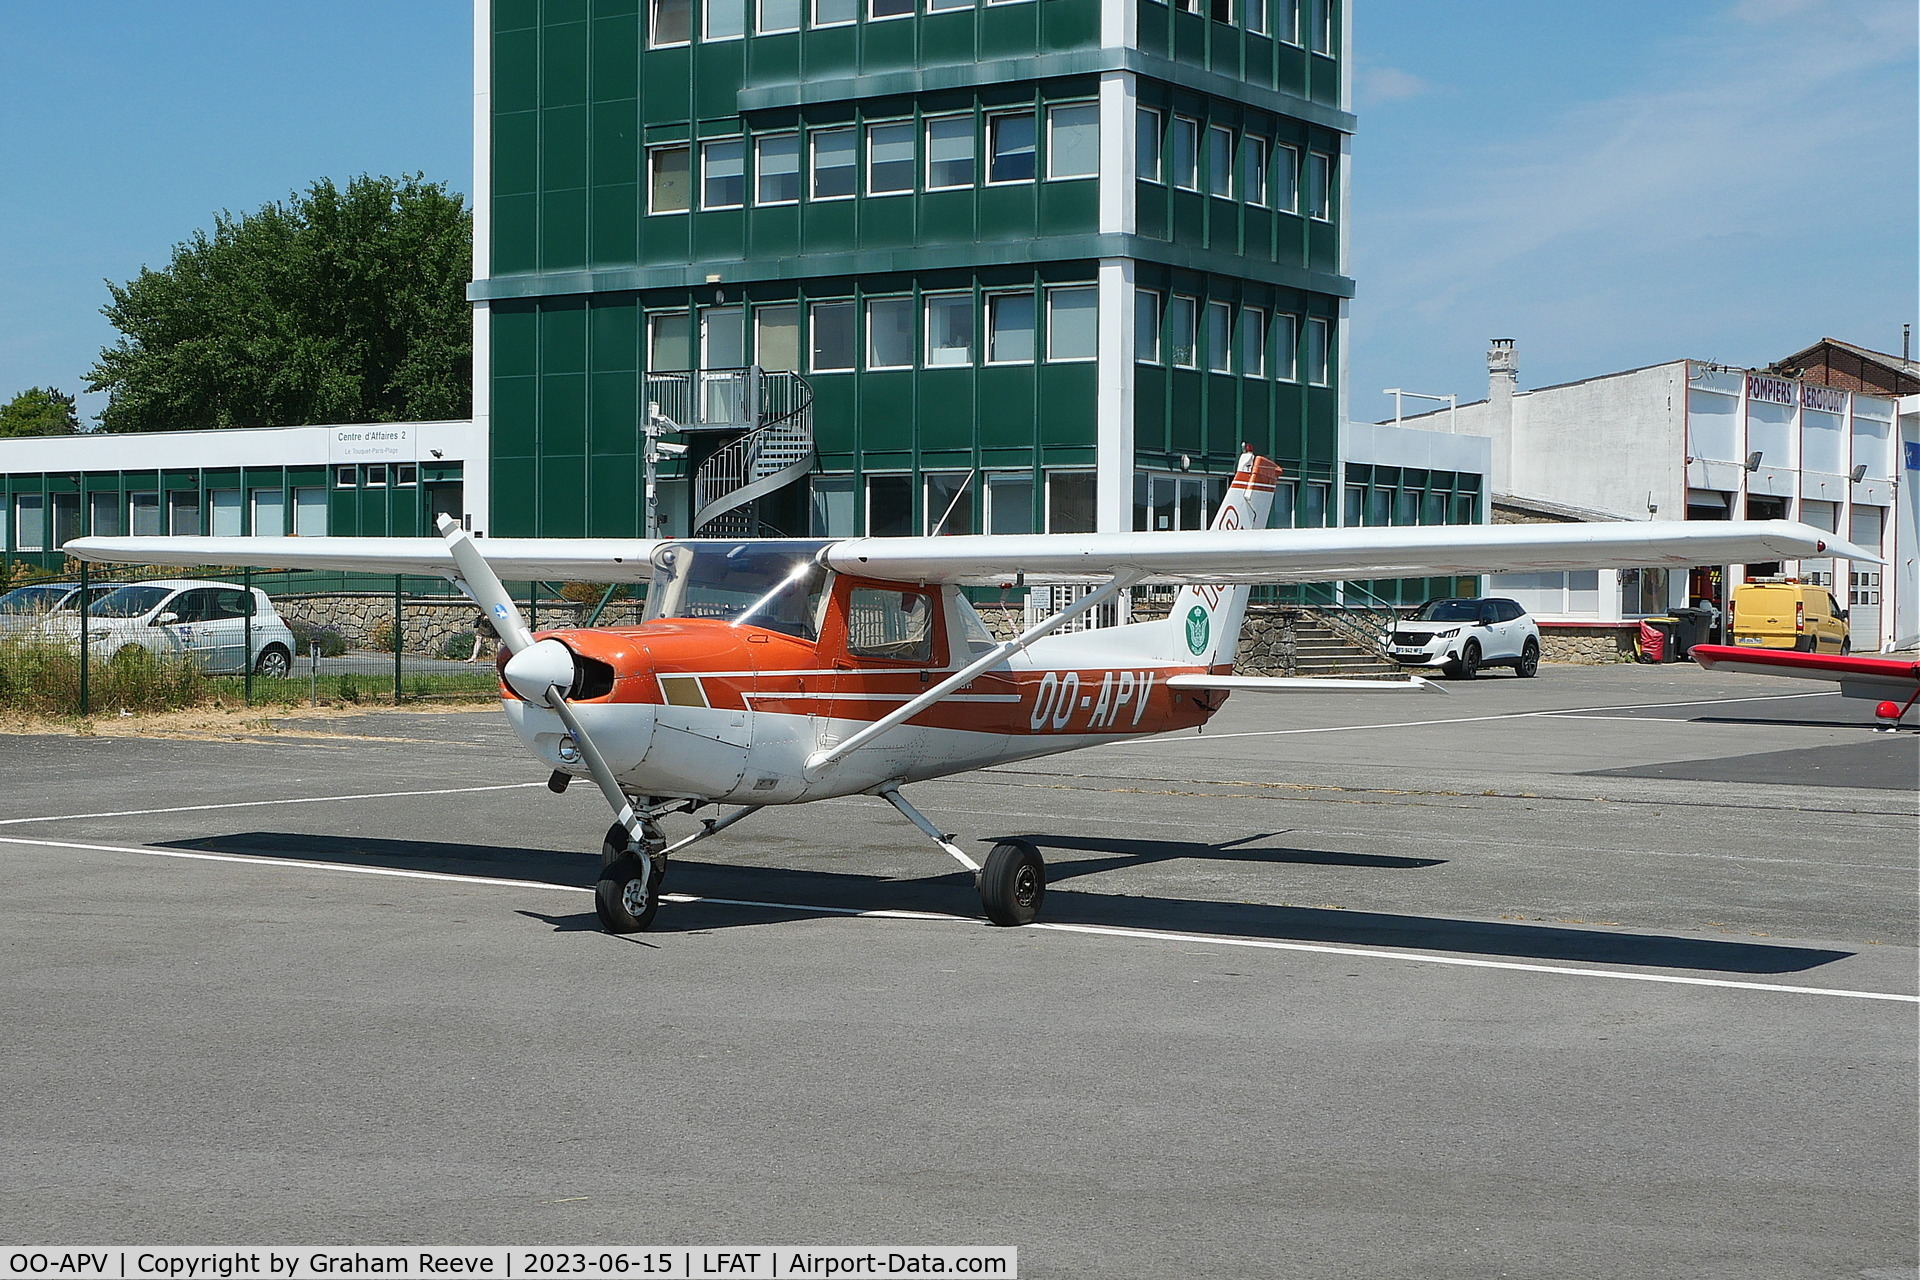 OO-APV, 1978 Cessna 152 II C/N 15279842, Parked at Le Touquet.